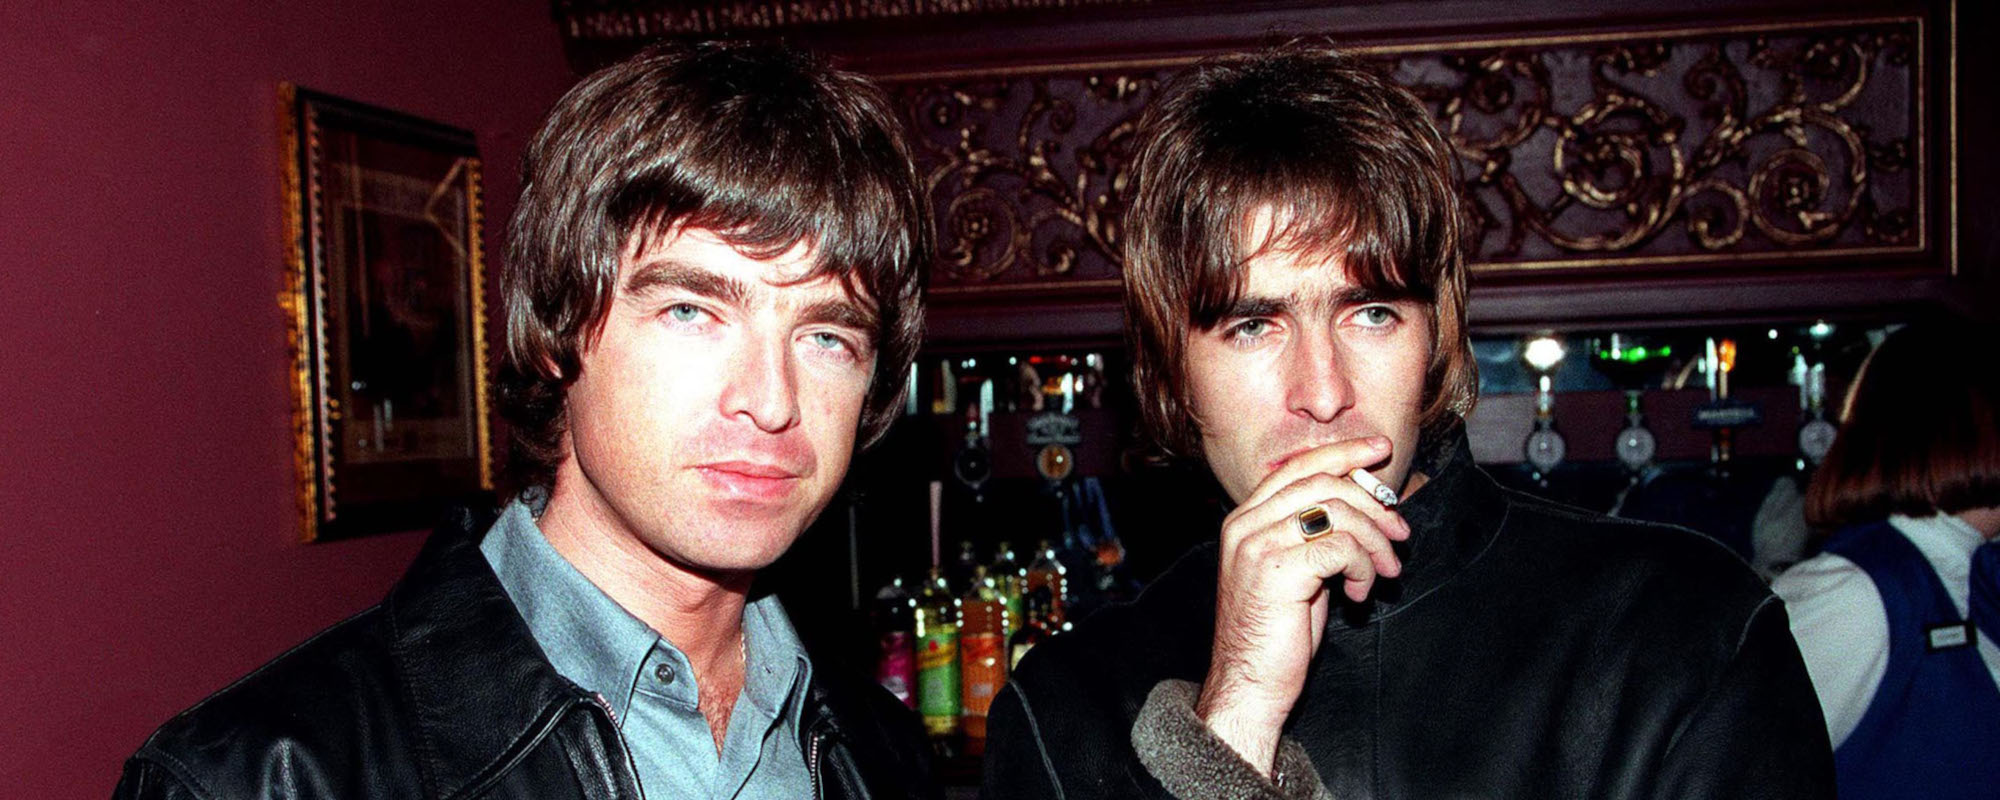 Behind the Beef: A Look at the Gallagher Brothers’ Heated Sibling Rivalry